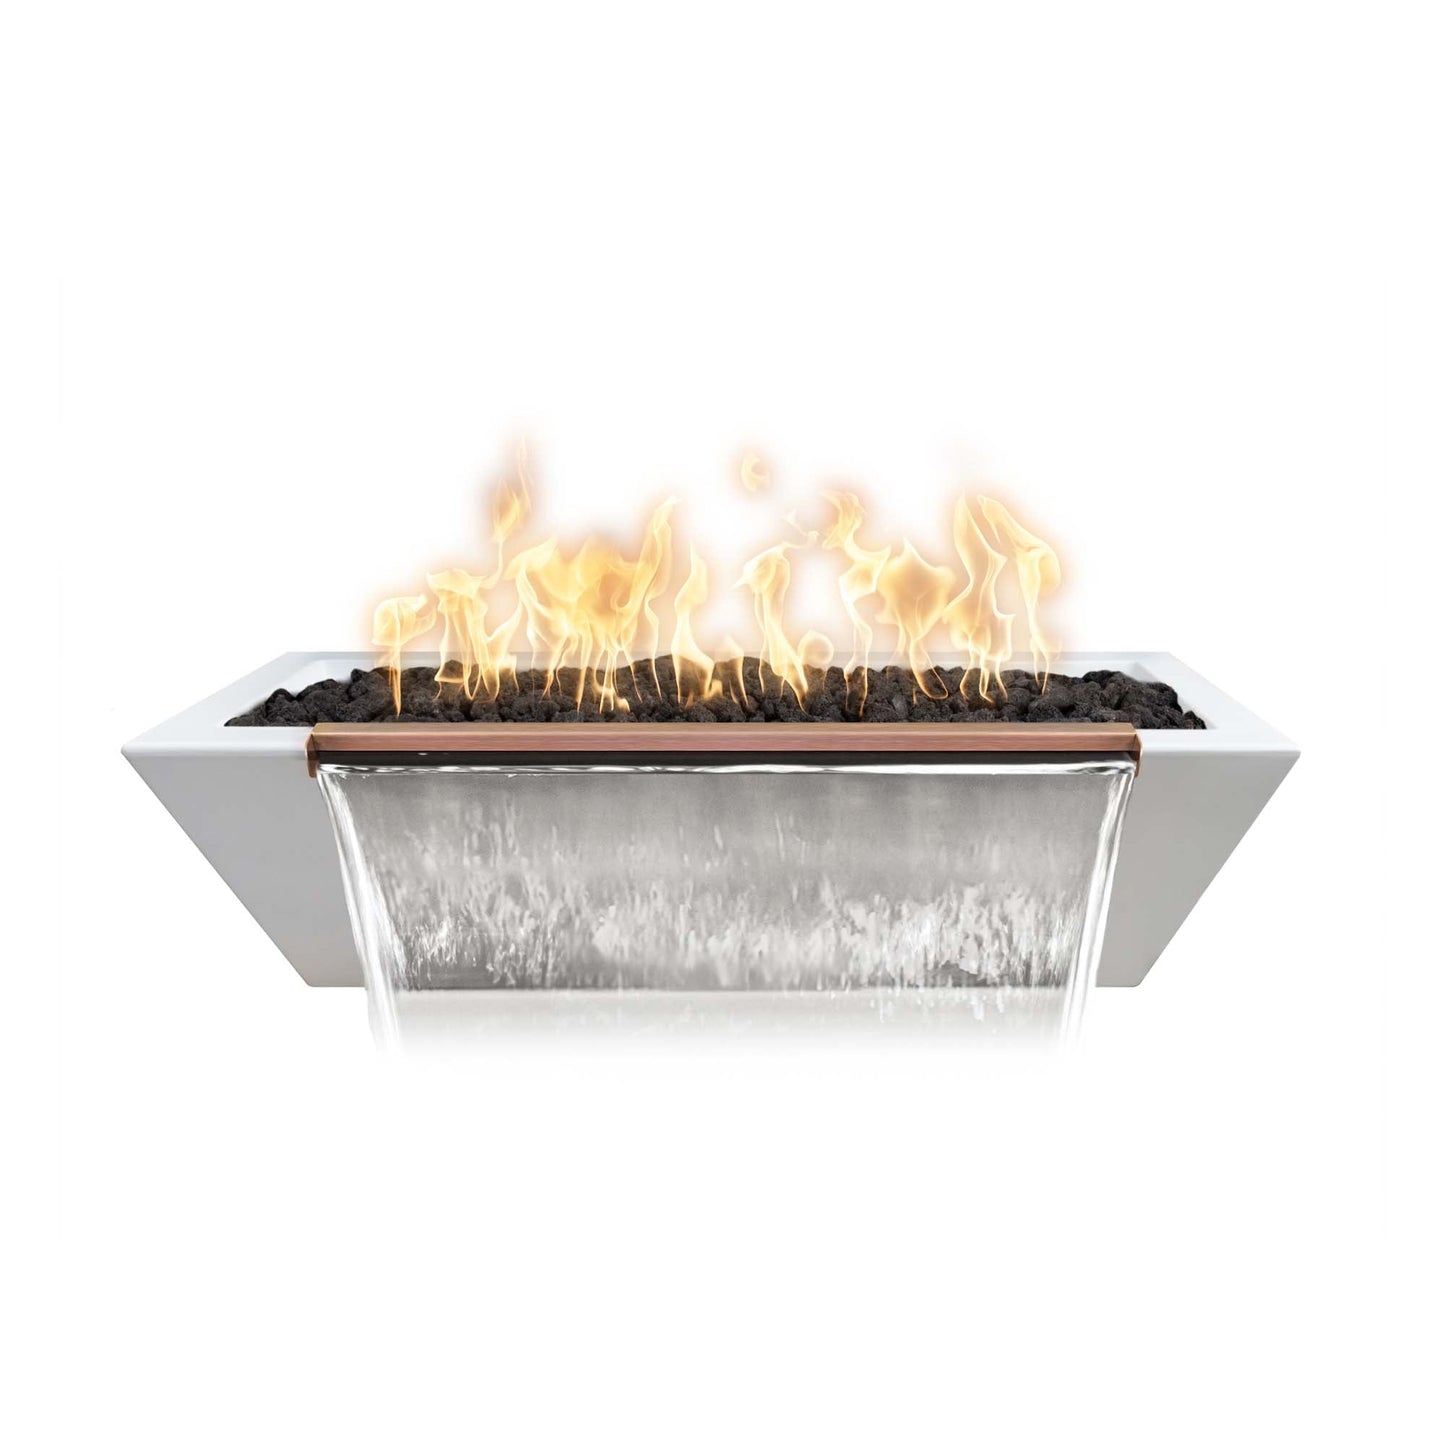 The Outdoor Plus Linear Maya 60" Metallic Pearl GFRC Concrete Natural Gas Fire & Water Bowl with 12V Electronic Ignition